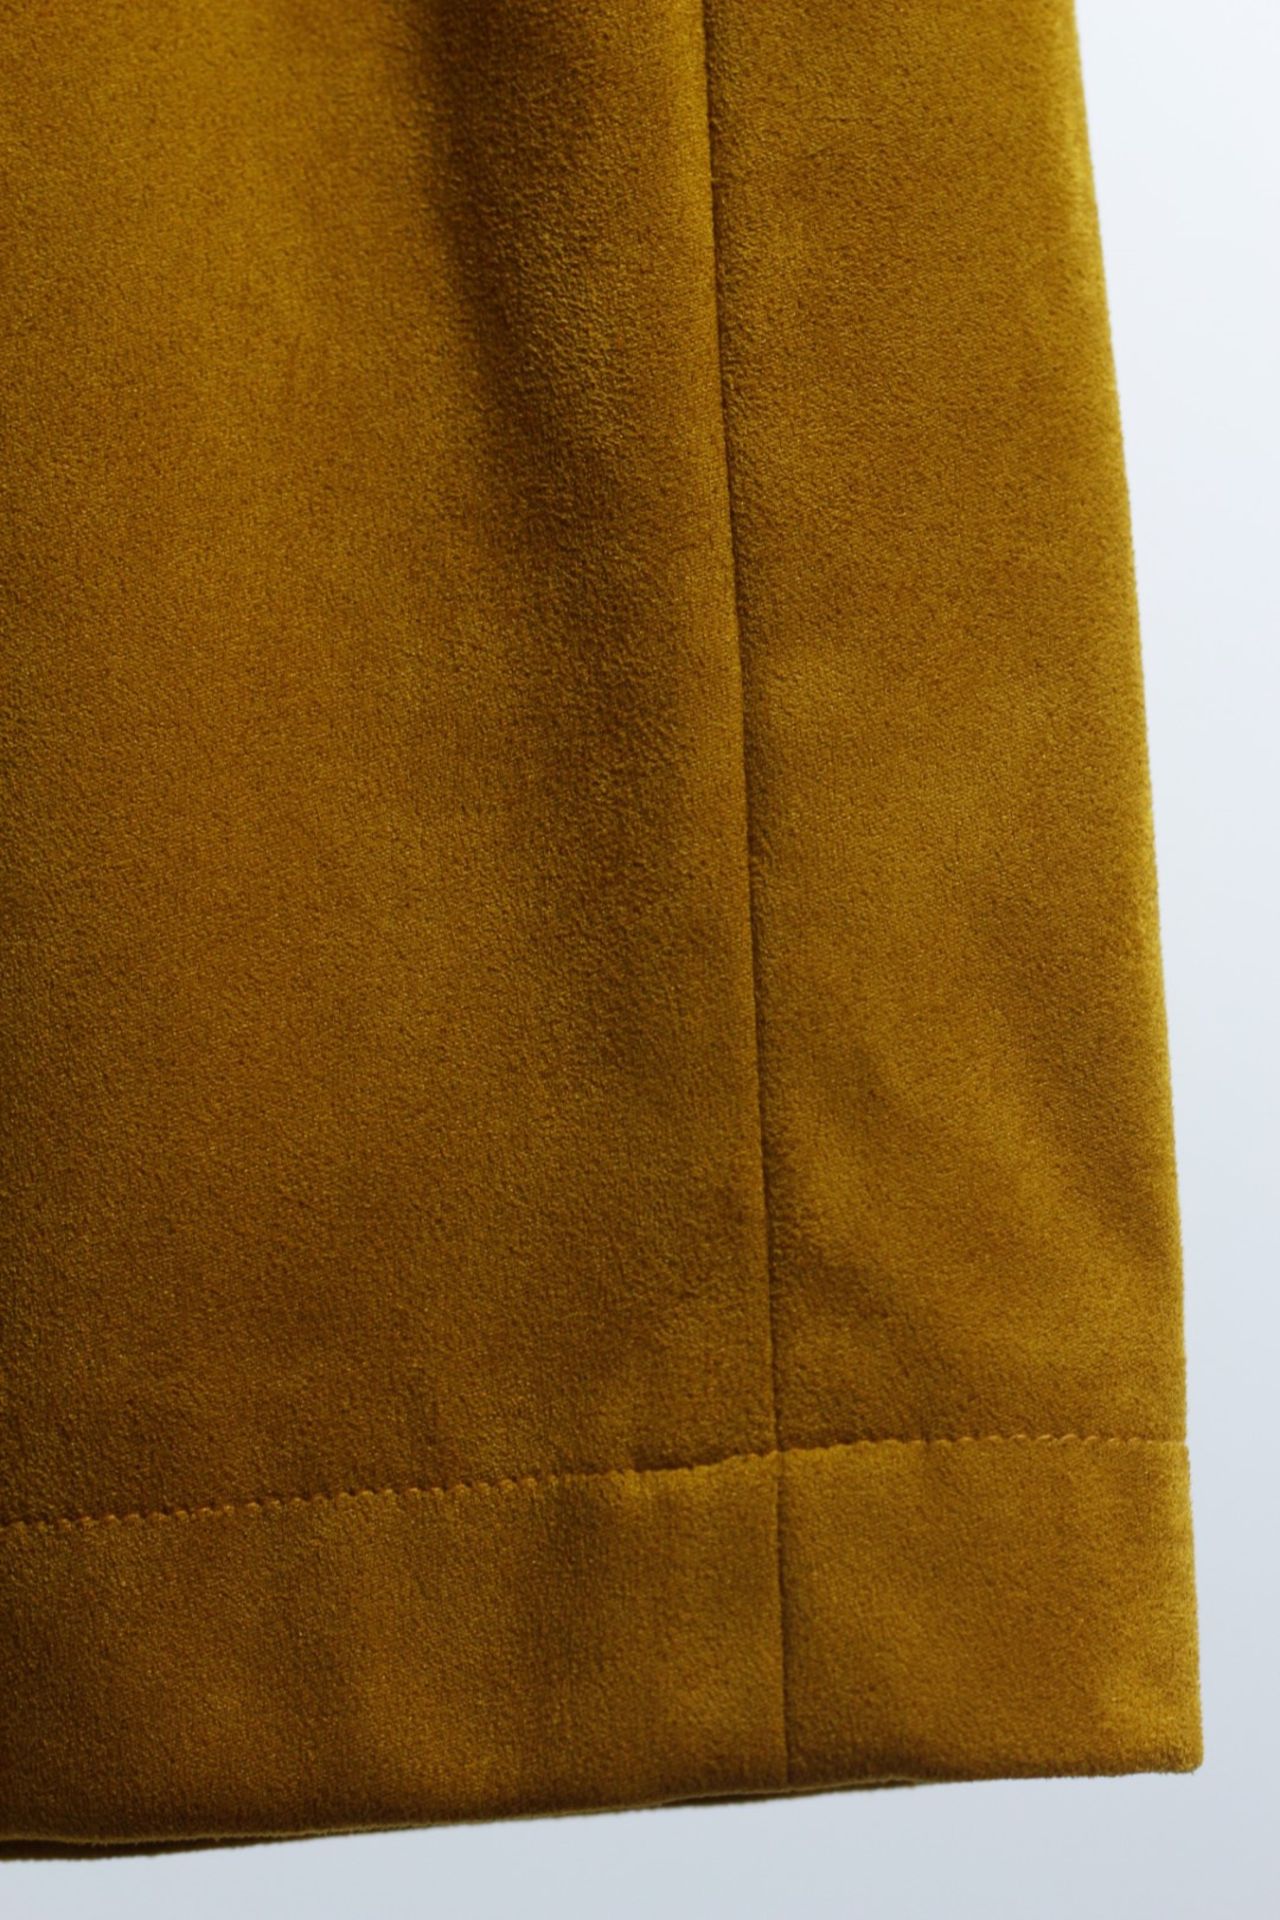 1 x Boutique Le Duc Ochre Skirt - From a High End Clothing Boutique In The Netherlands - - Image 2 of 3